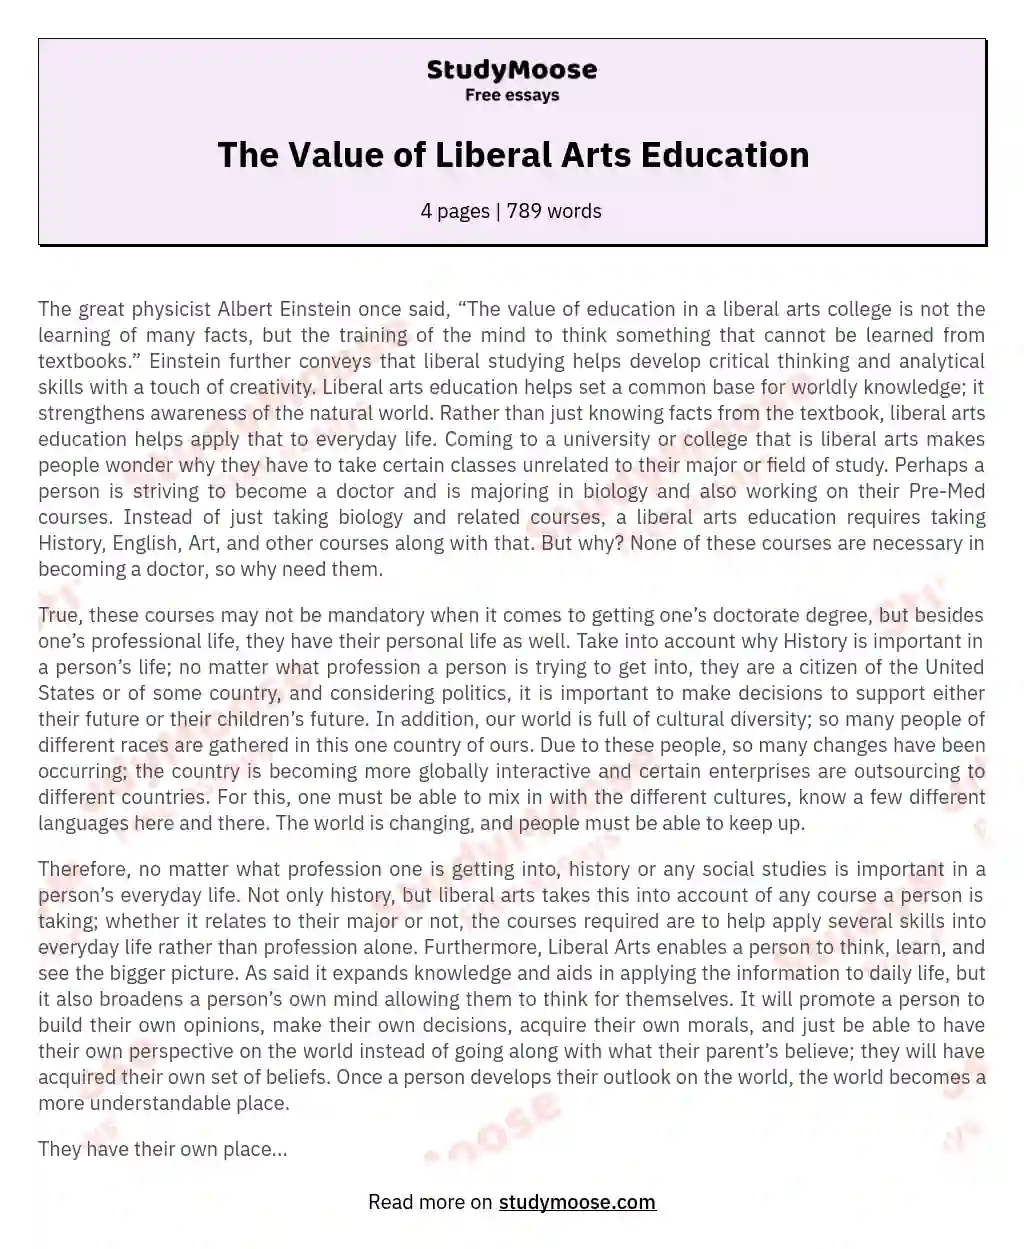 The Value of Liberal Arts Education